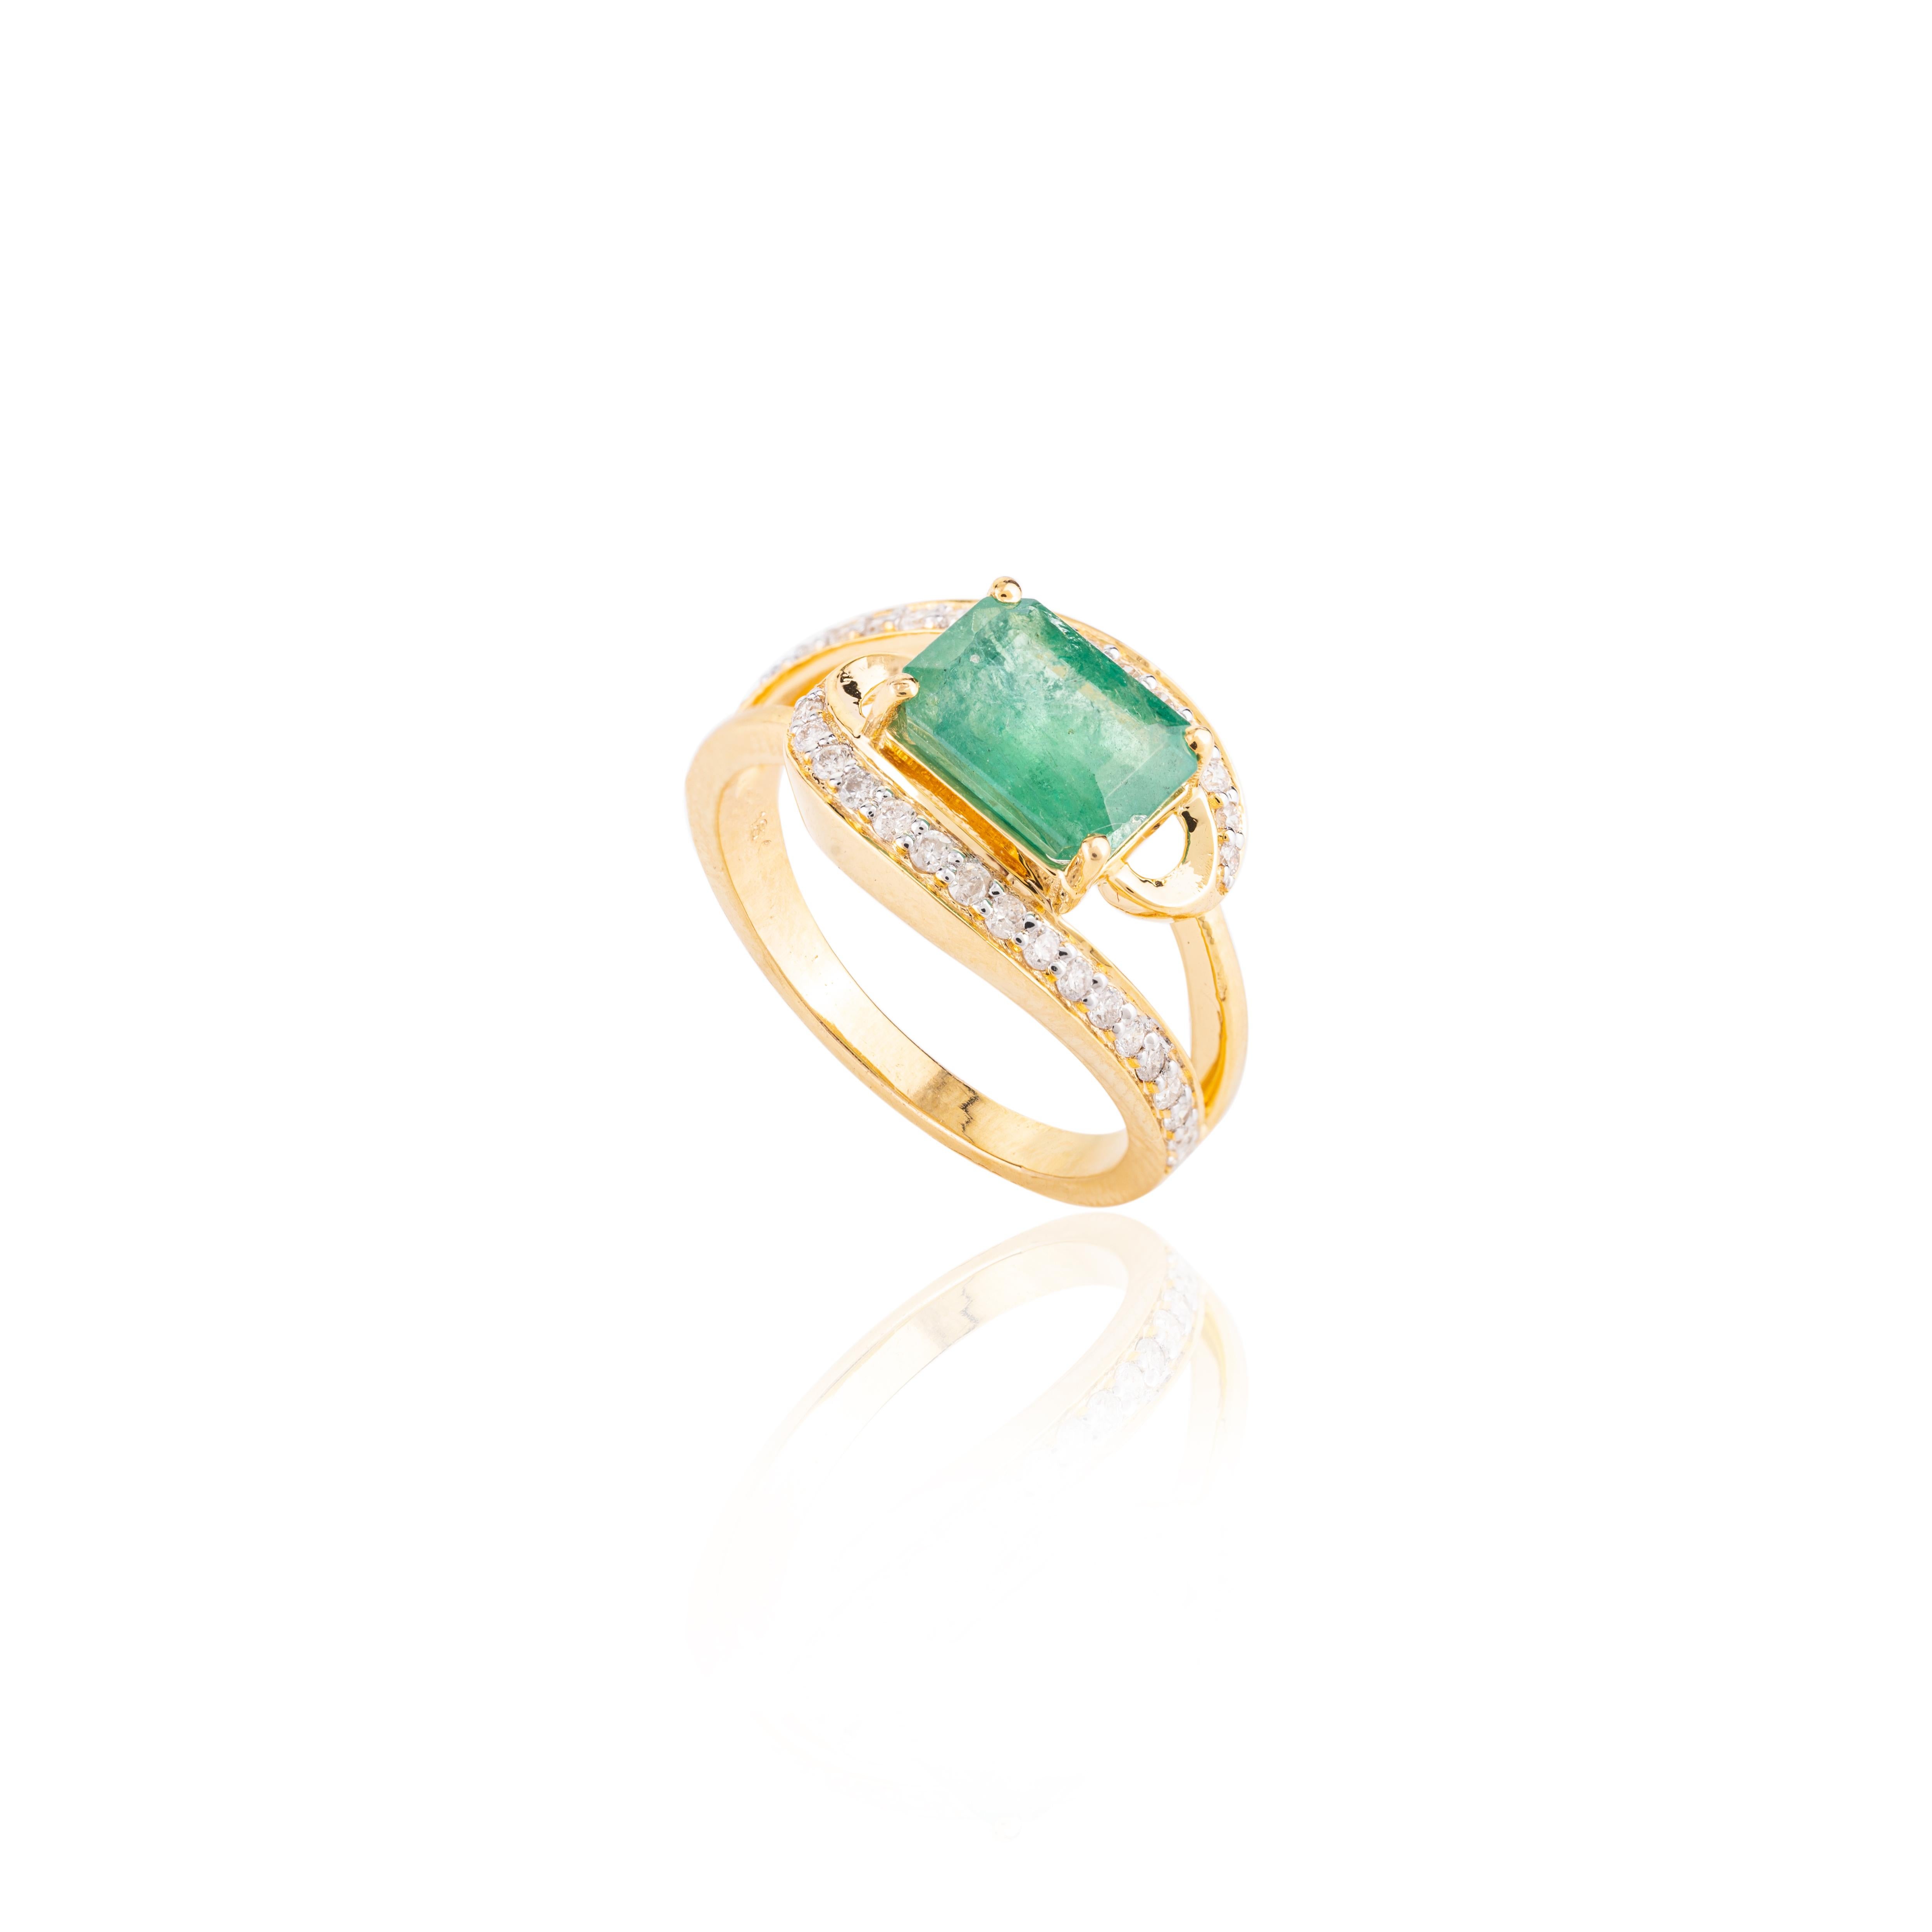 For Sale:  Magnificent Emerald and Diamond Wedding Ring in 18k Solid Yellow Gold 8